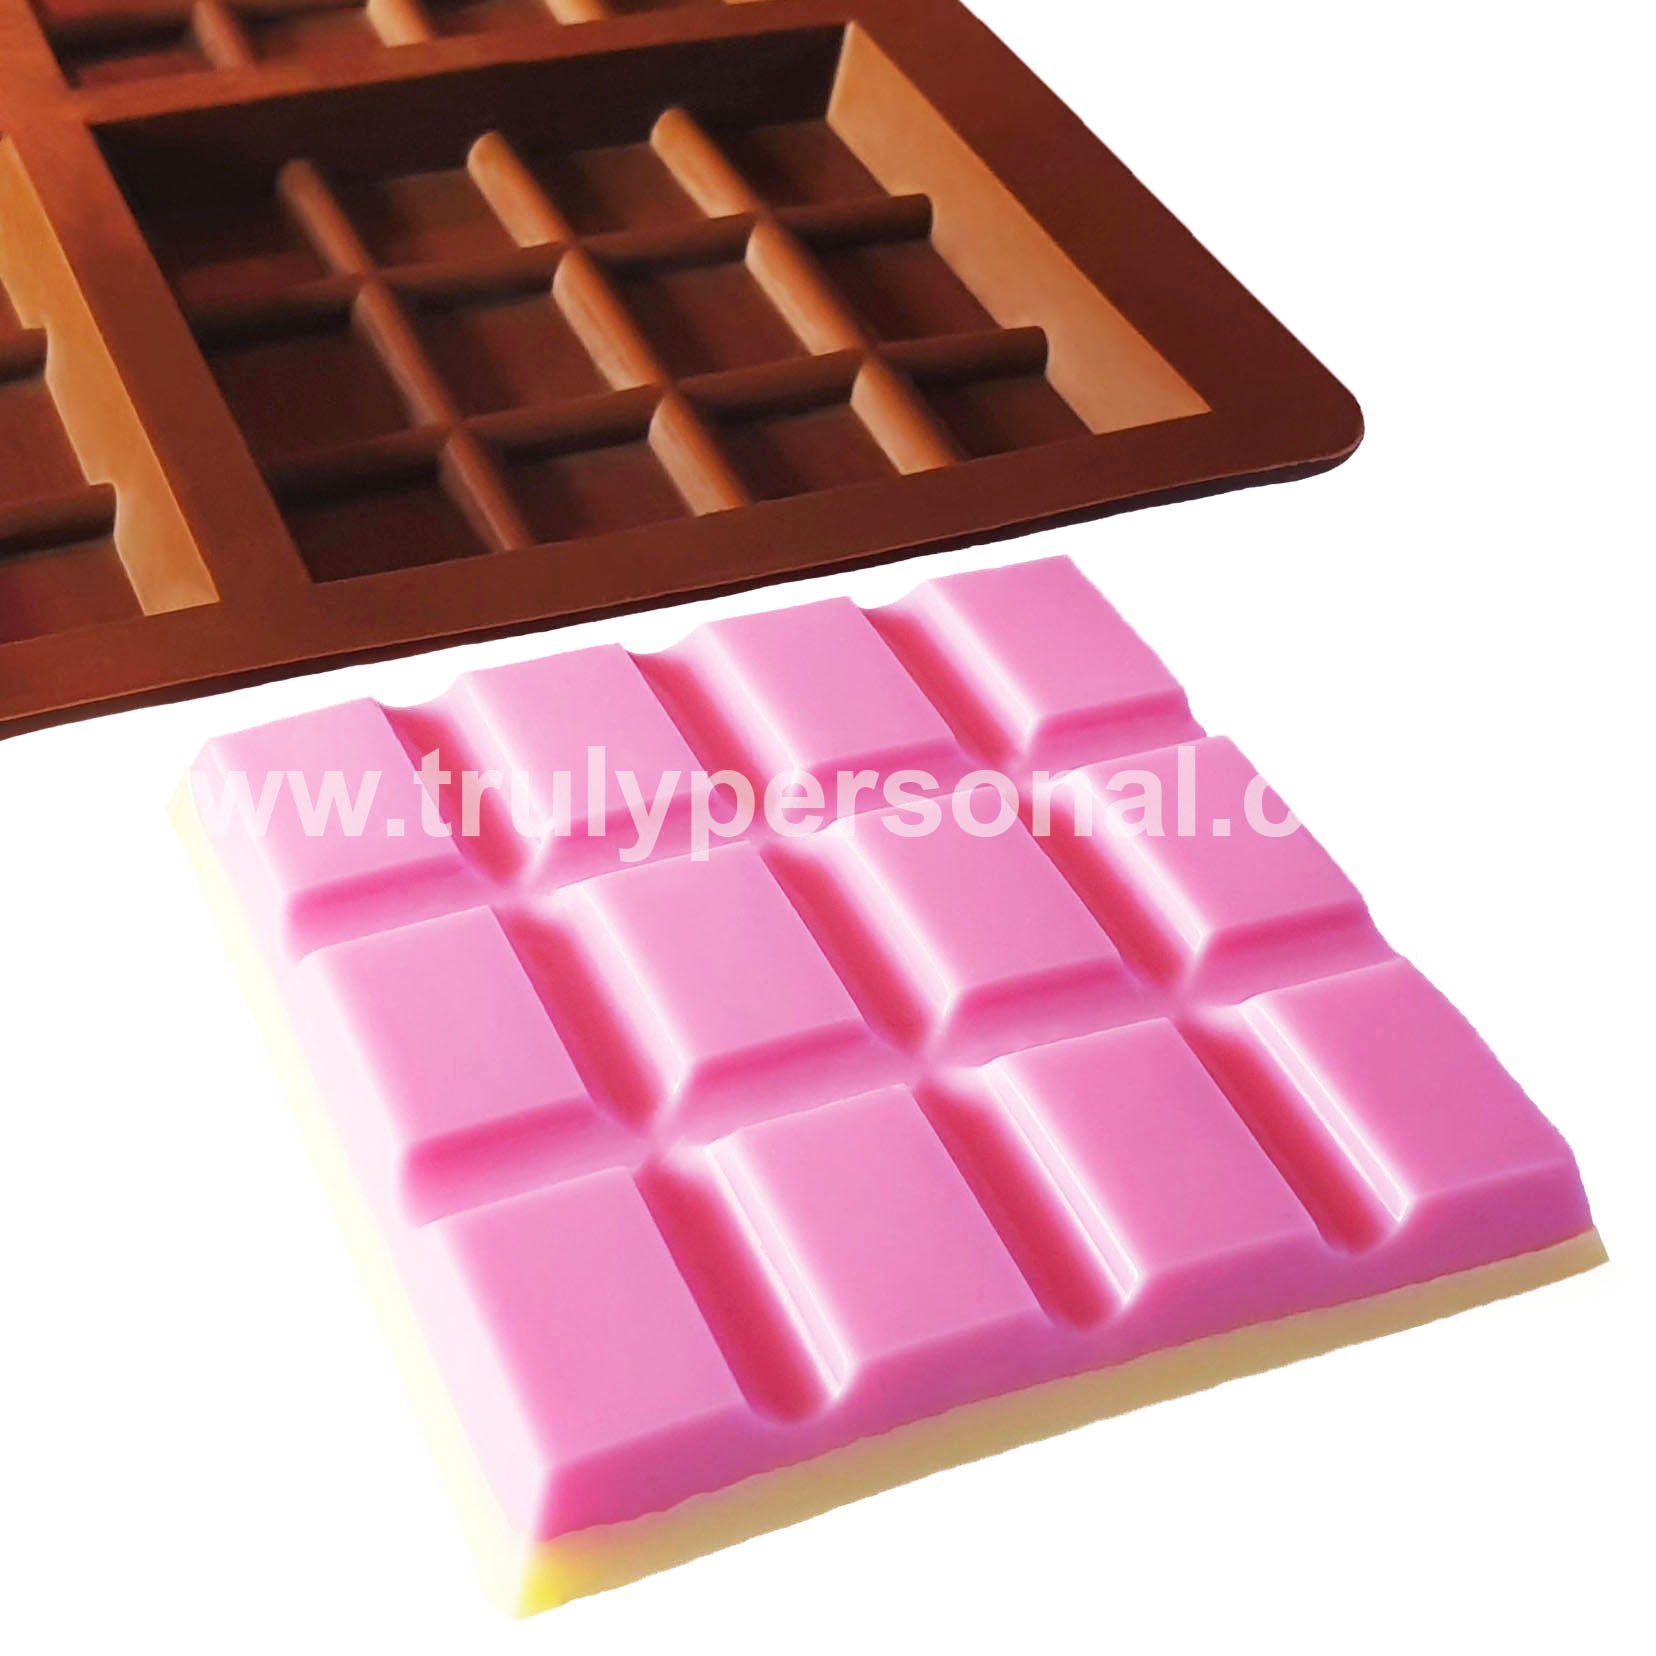 Snap Bar Silicone Mould - 6 x 12 | Wax Melts | Truly Personal Ltd